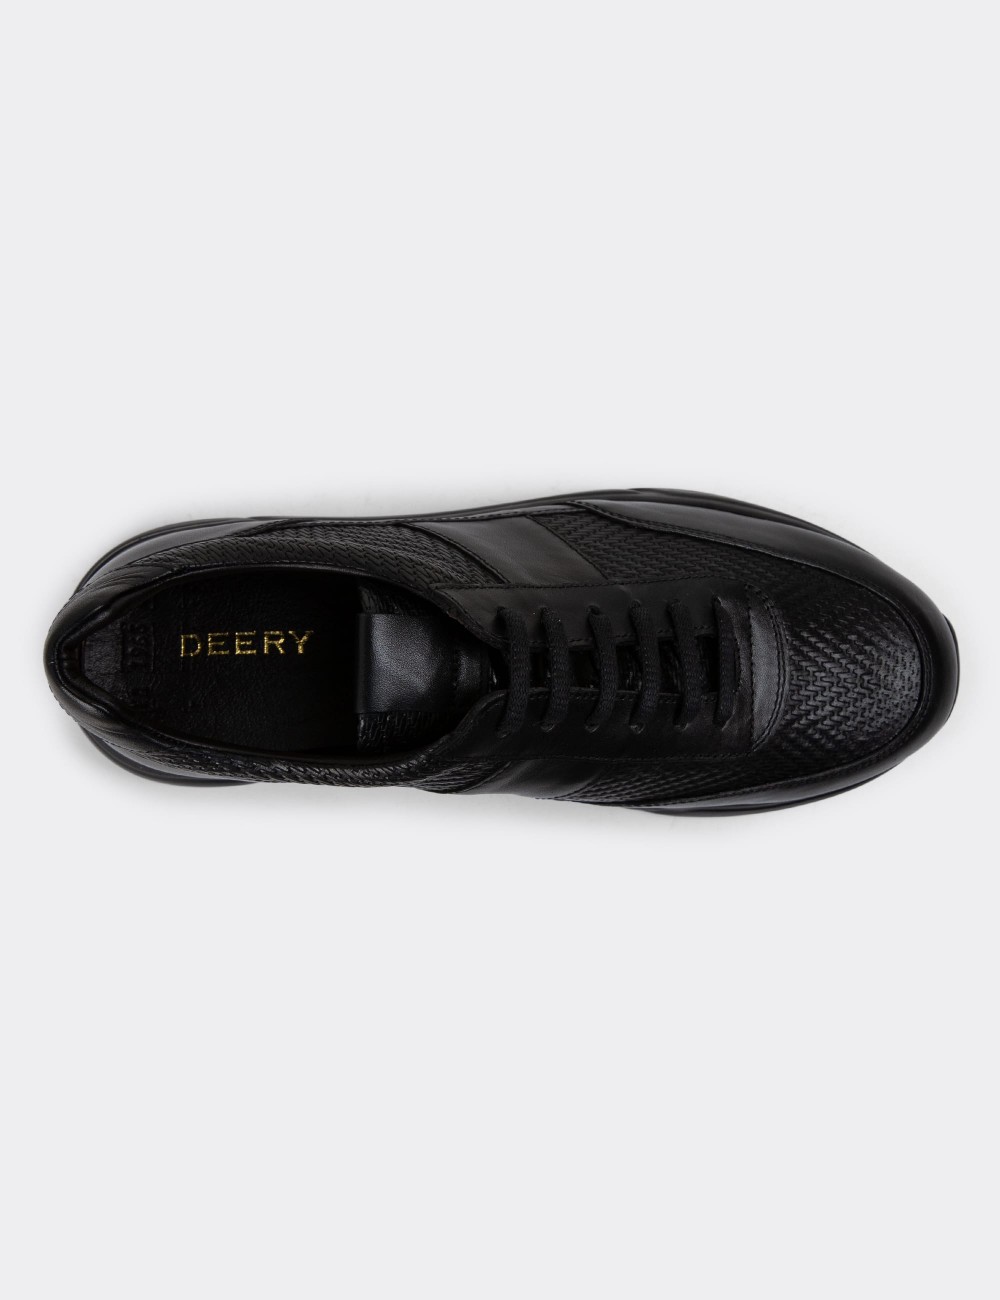 Black Leather Sneakers - 01963MSYHE04